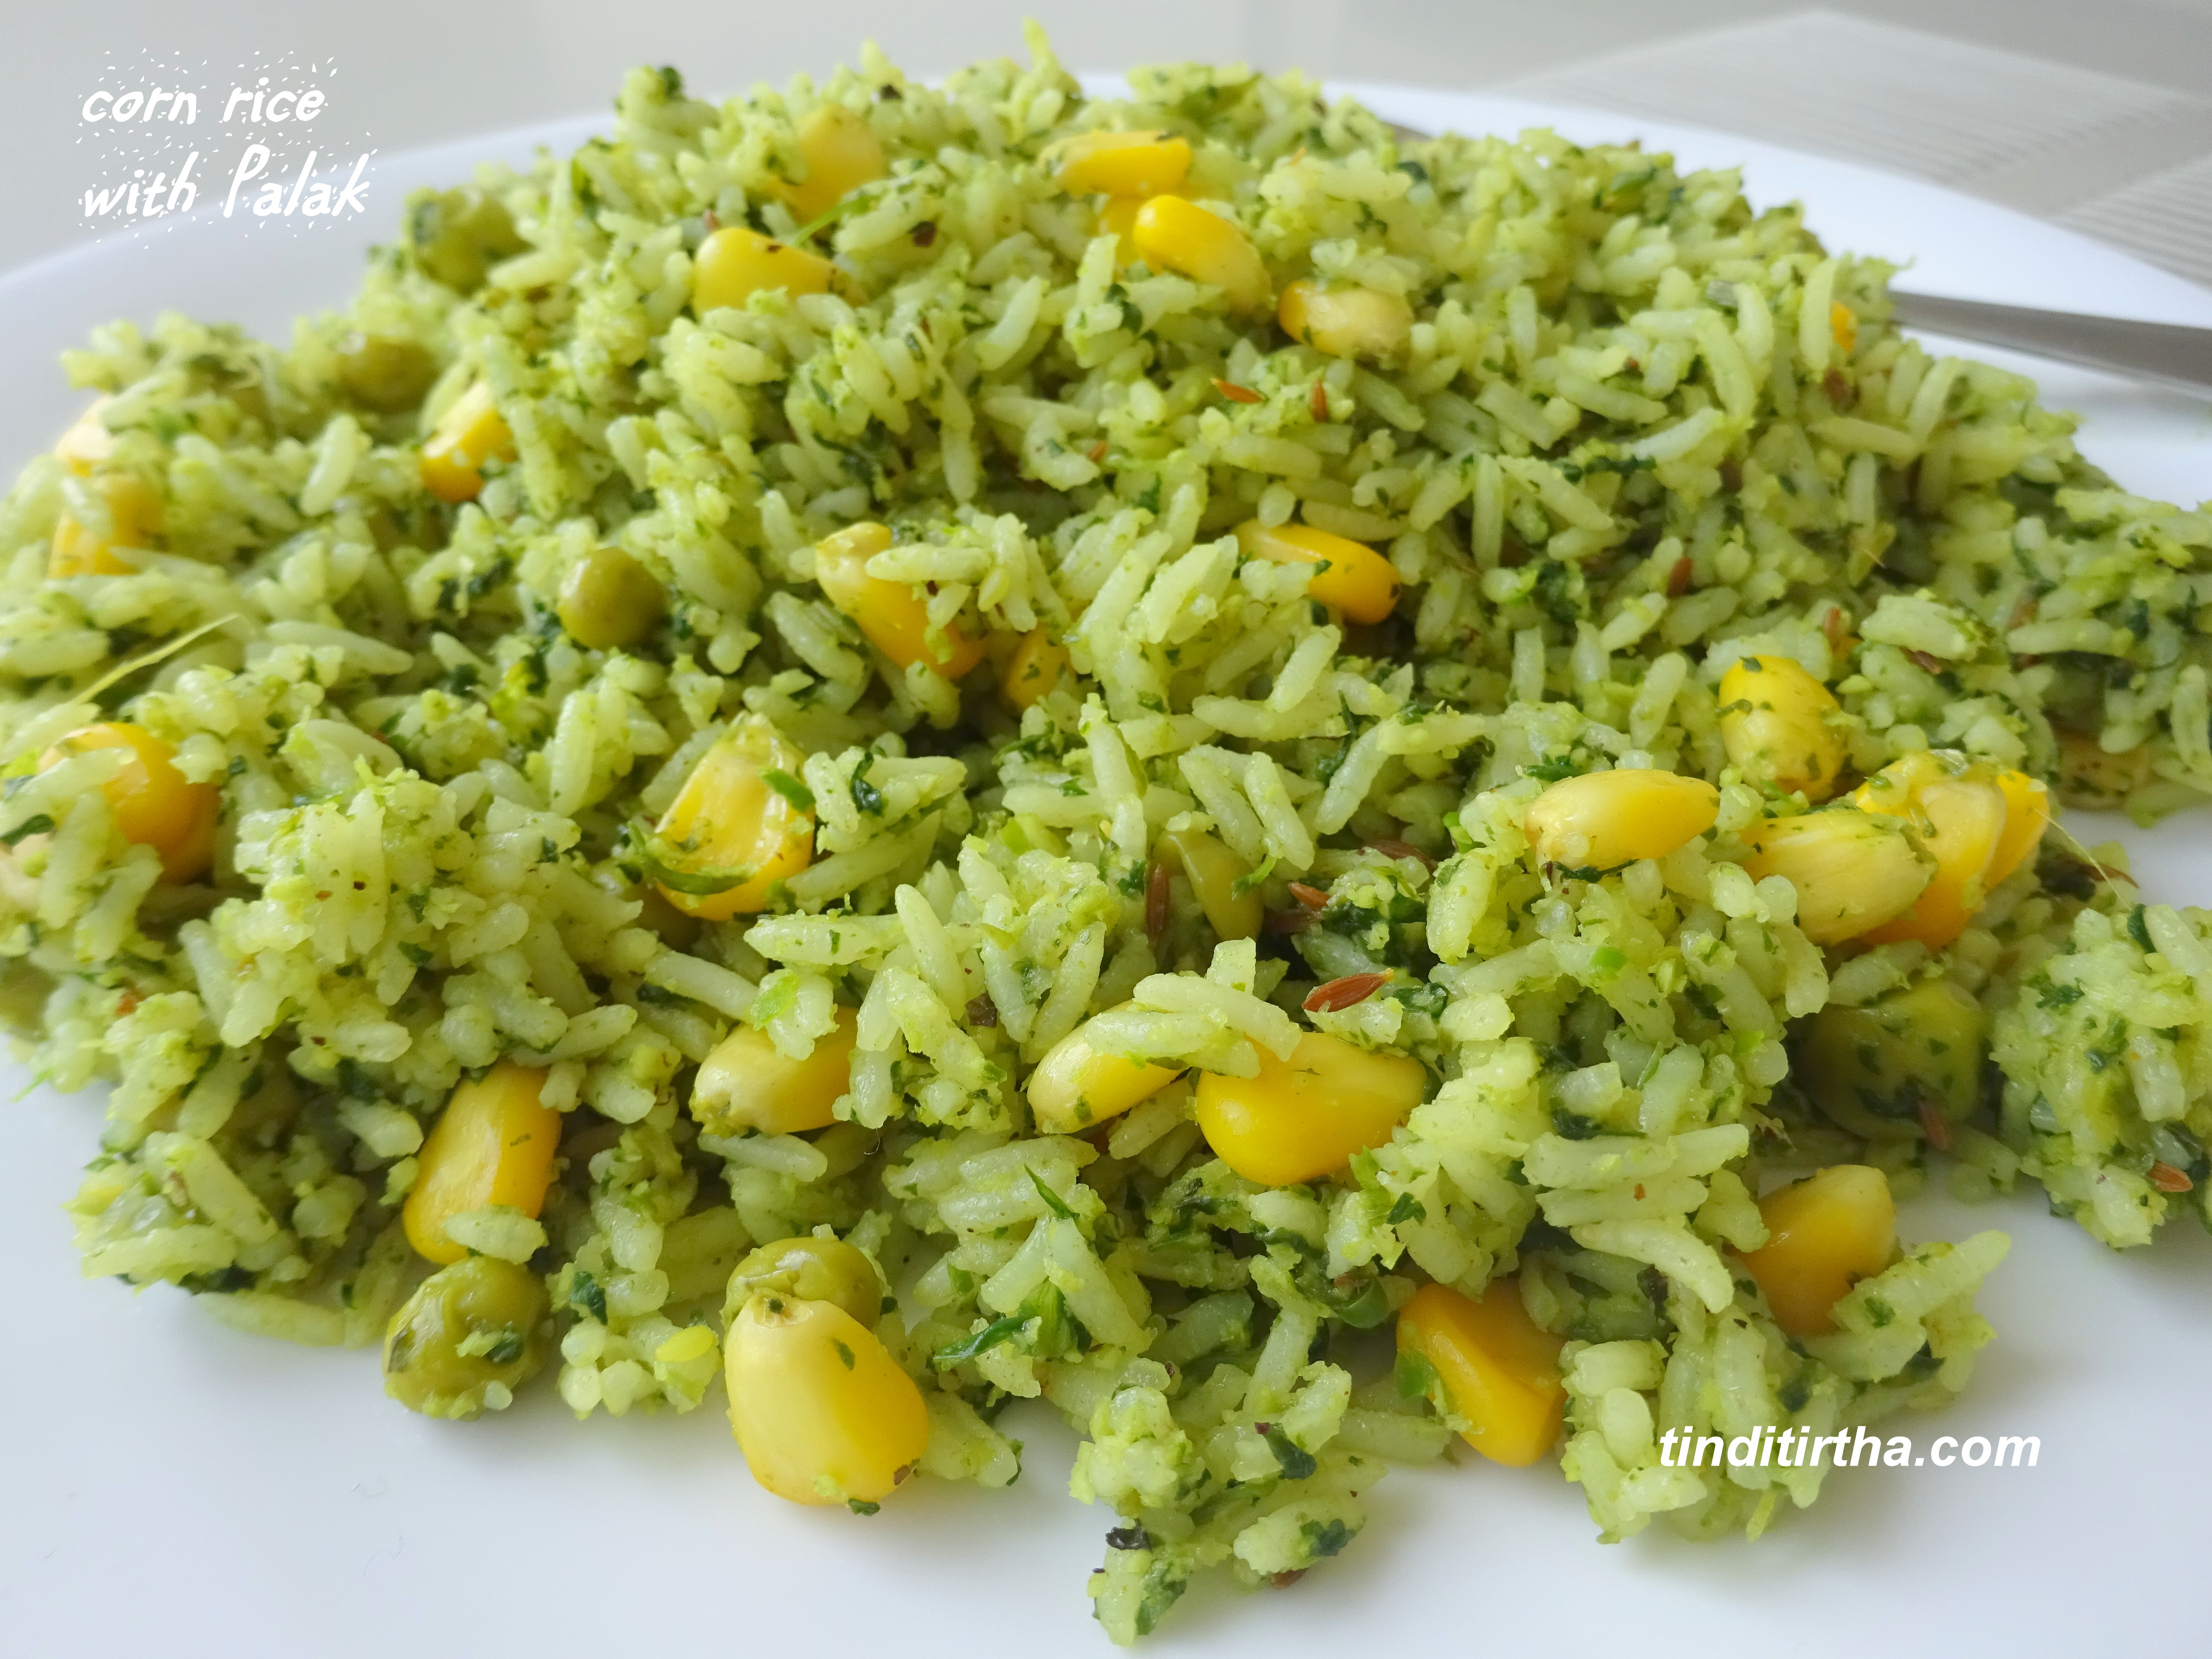 SWEET CORN RICE / JOLADA ANNA without/with using Palak as well